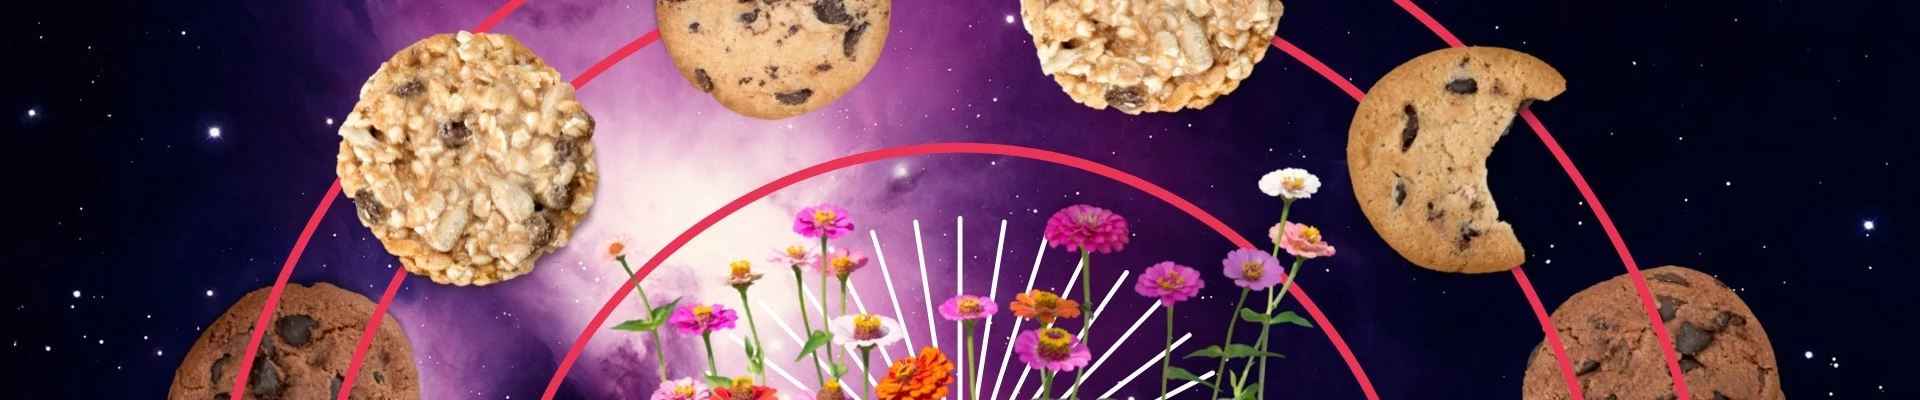 cookies floating in a nebula